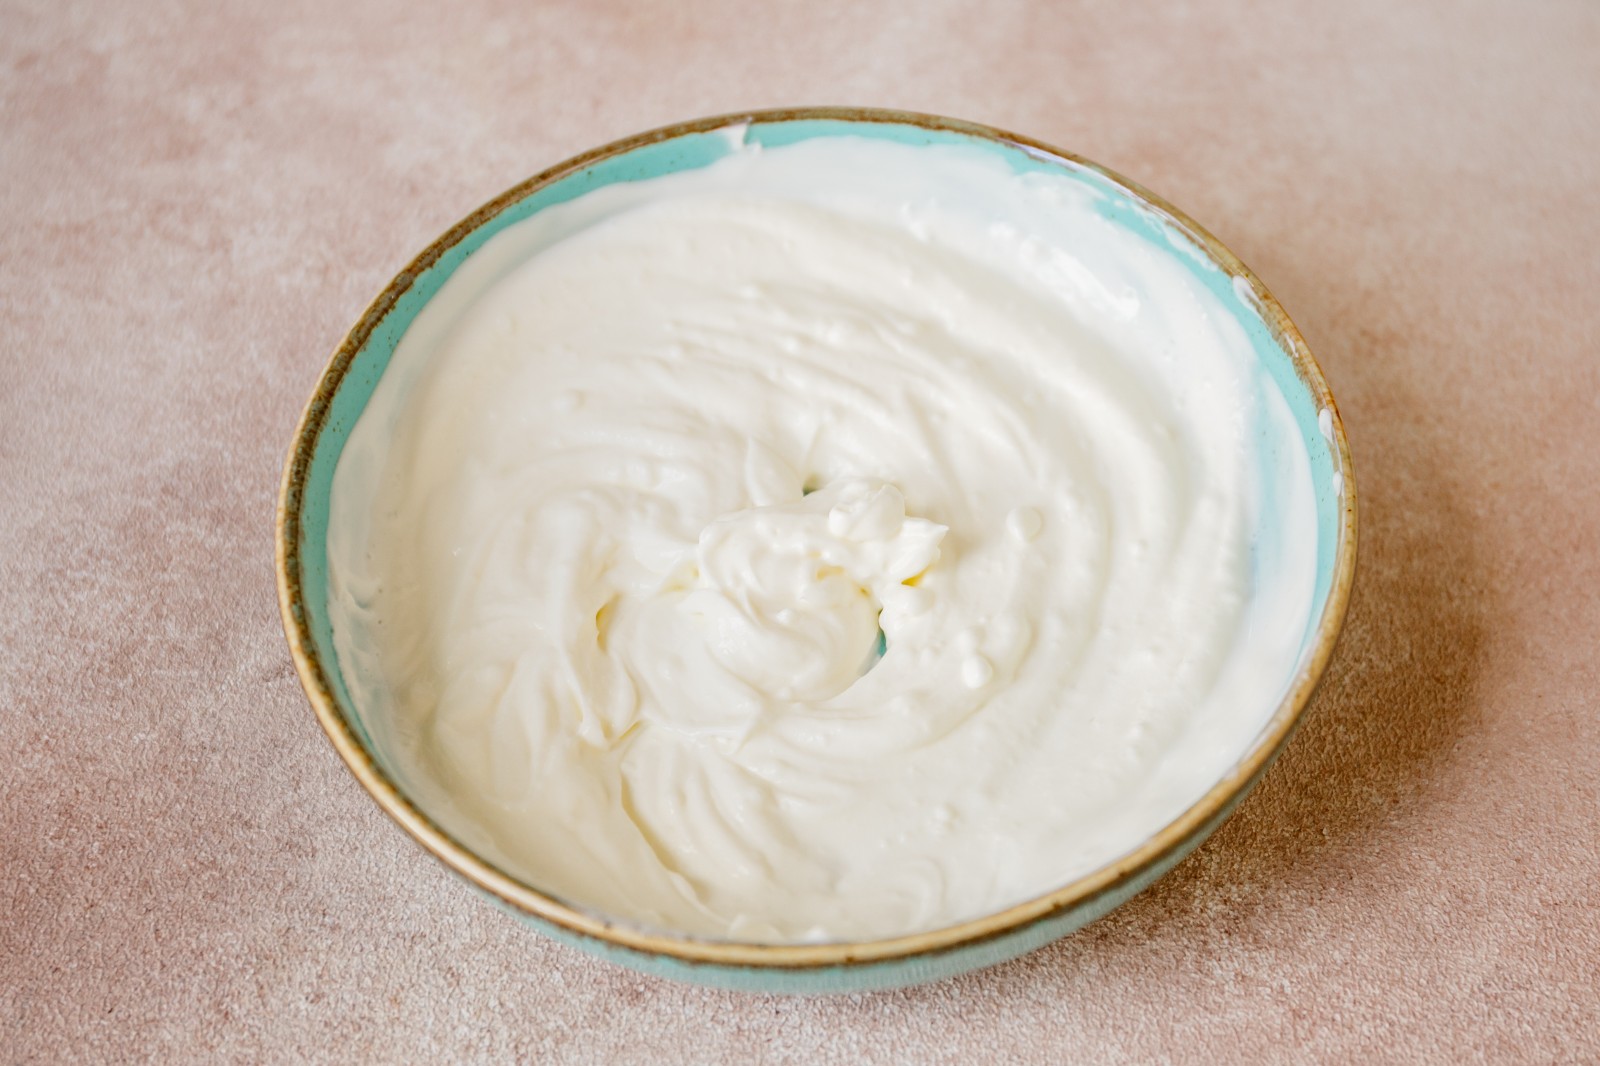 A bowl of whipped cream made from heavy cream.